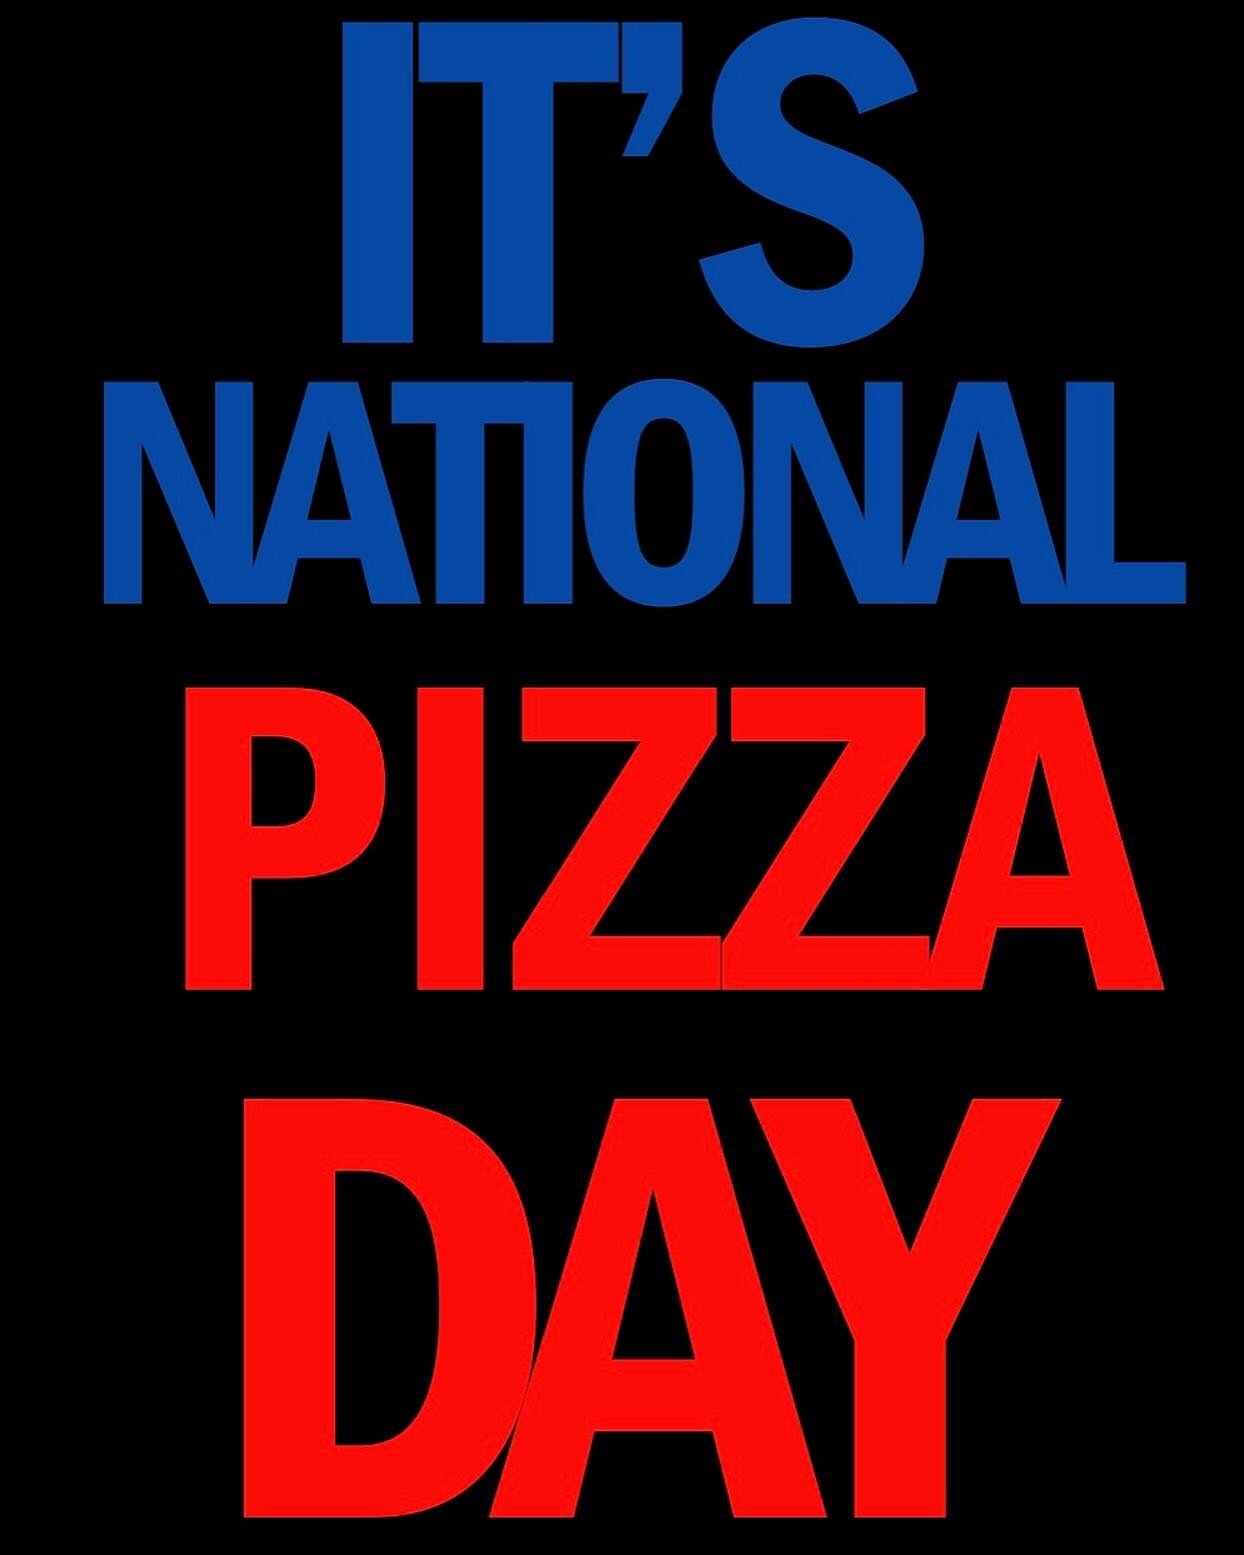 IT ONLY COMES ONCE A YEAR BUT SO DOES EVERY DAY OF THE YEAR.  REALLY EACH DAY ONLY COMES ONCE EVER SO EMBRACE EACH DAY LIKE EVERY DAY IS NATIONAL PIZZA DAY OR NATIONAL PUPPY DAY OR WHATEVER YOU CELEBRATE  #PIZZA #DSP #detroitstylepizza #eastowngr #up